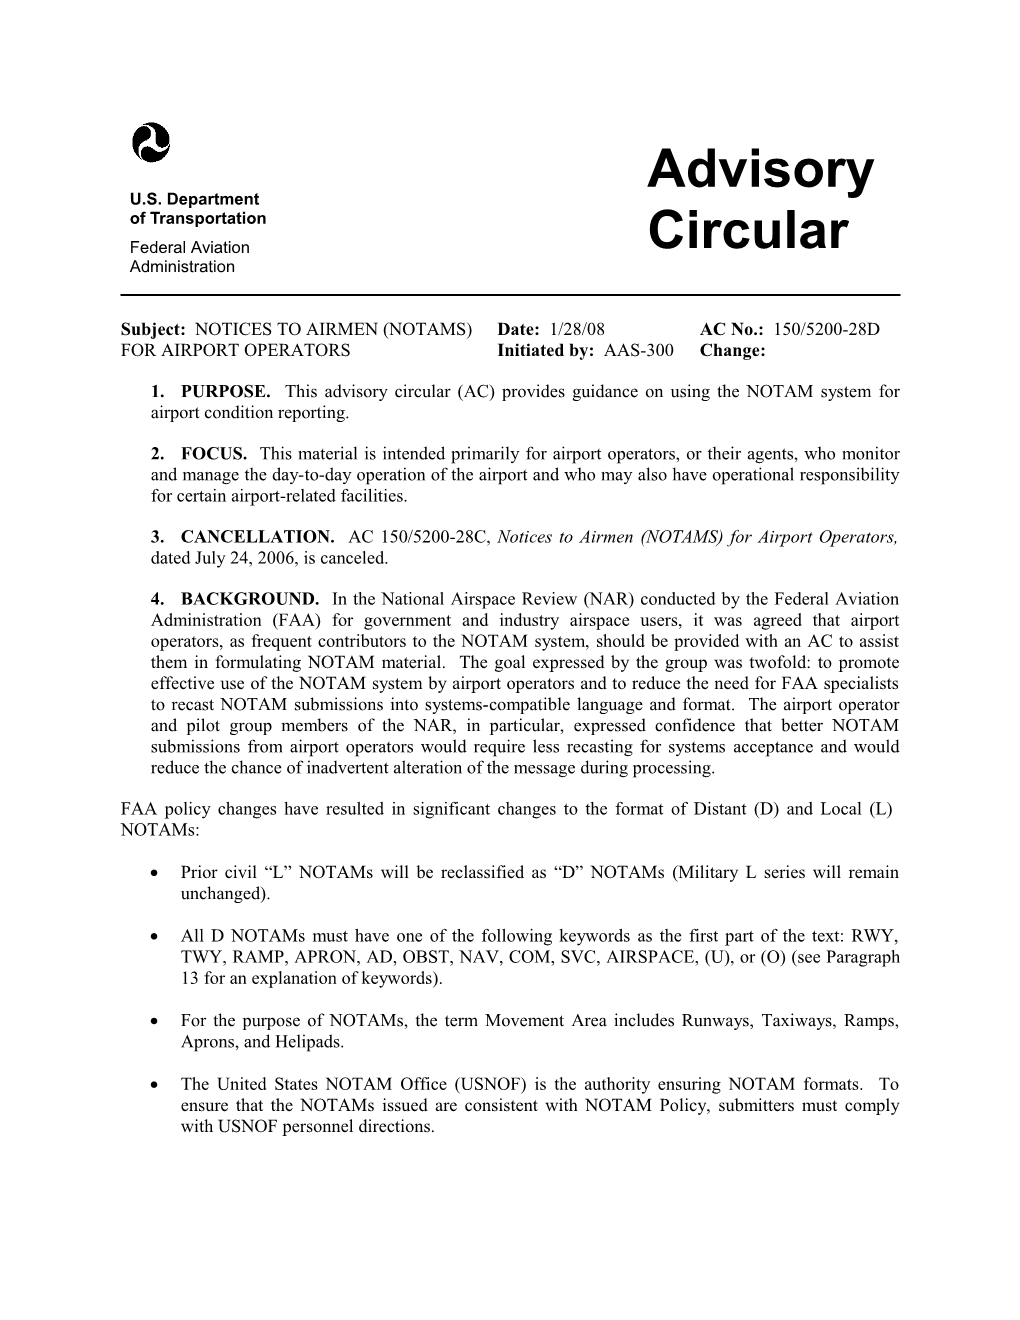 AC 150/5200-28D, NOTICES to AIRMEN (NOTAMS) for AIRPORT OPERATORS, 28 January 2008 (Rev